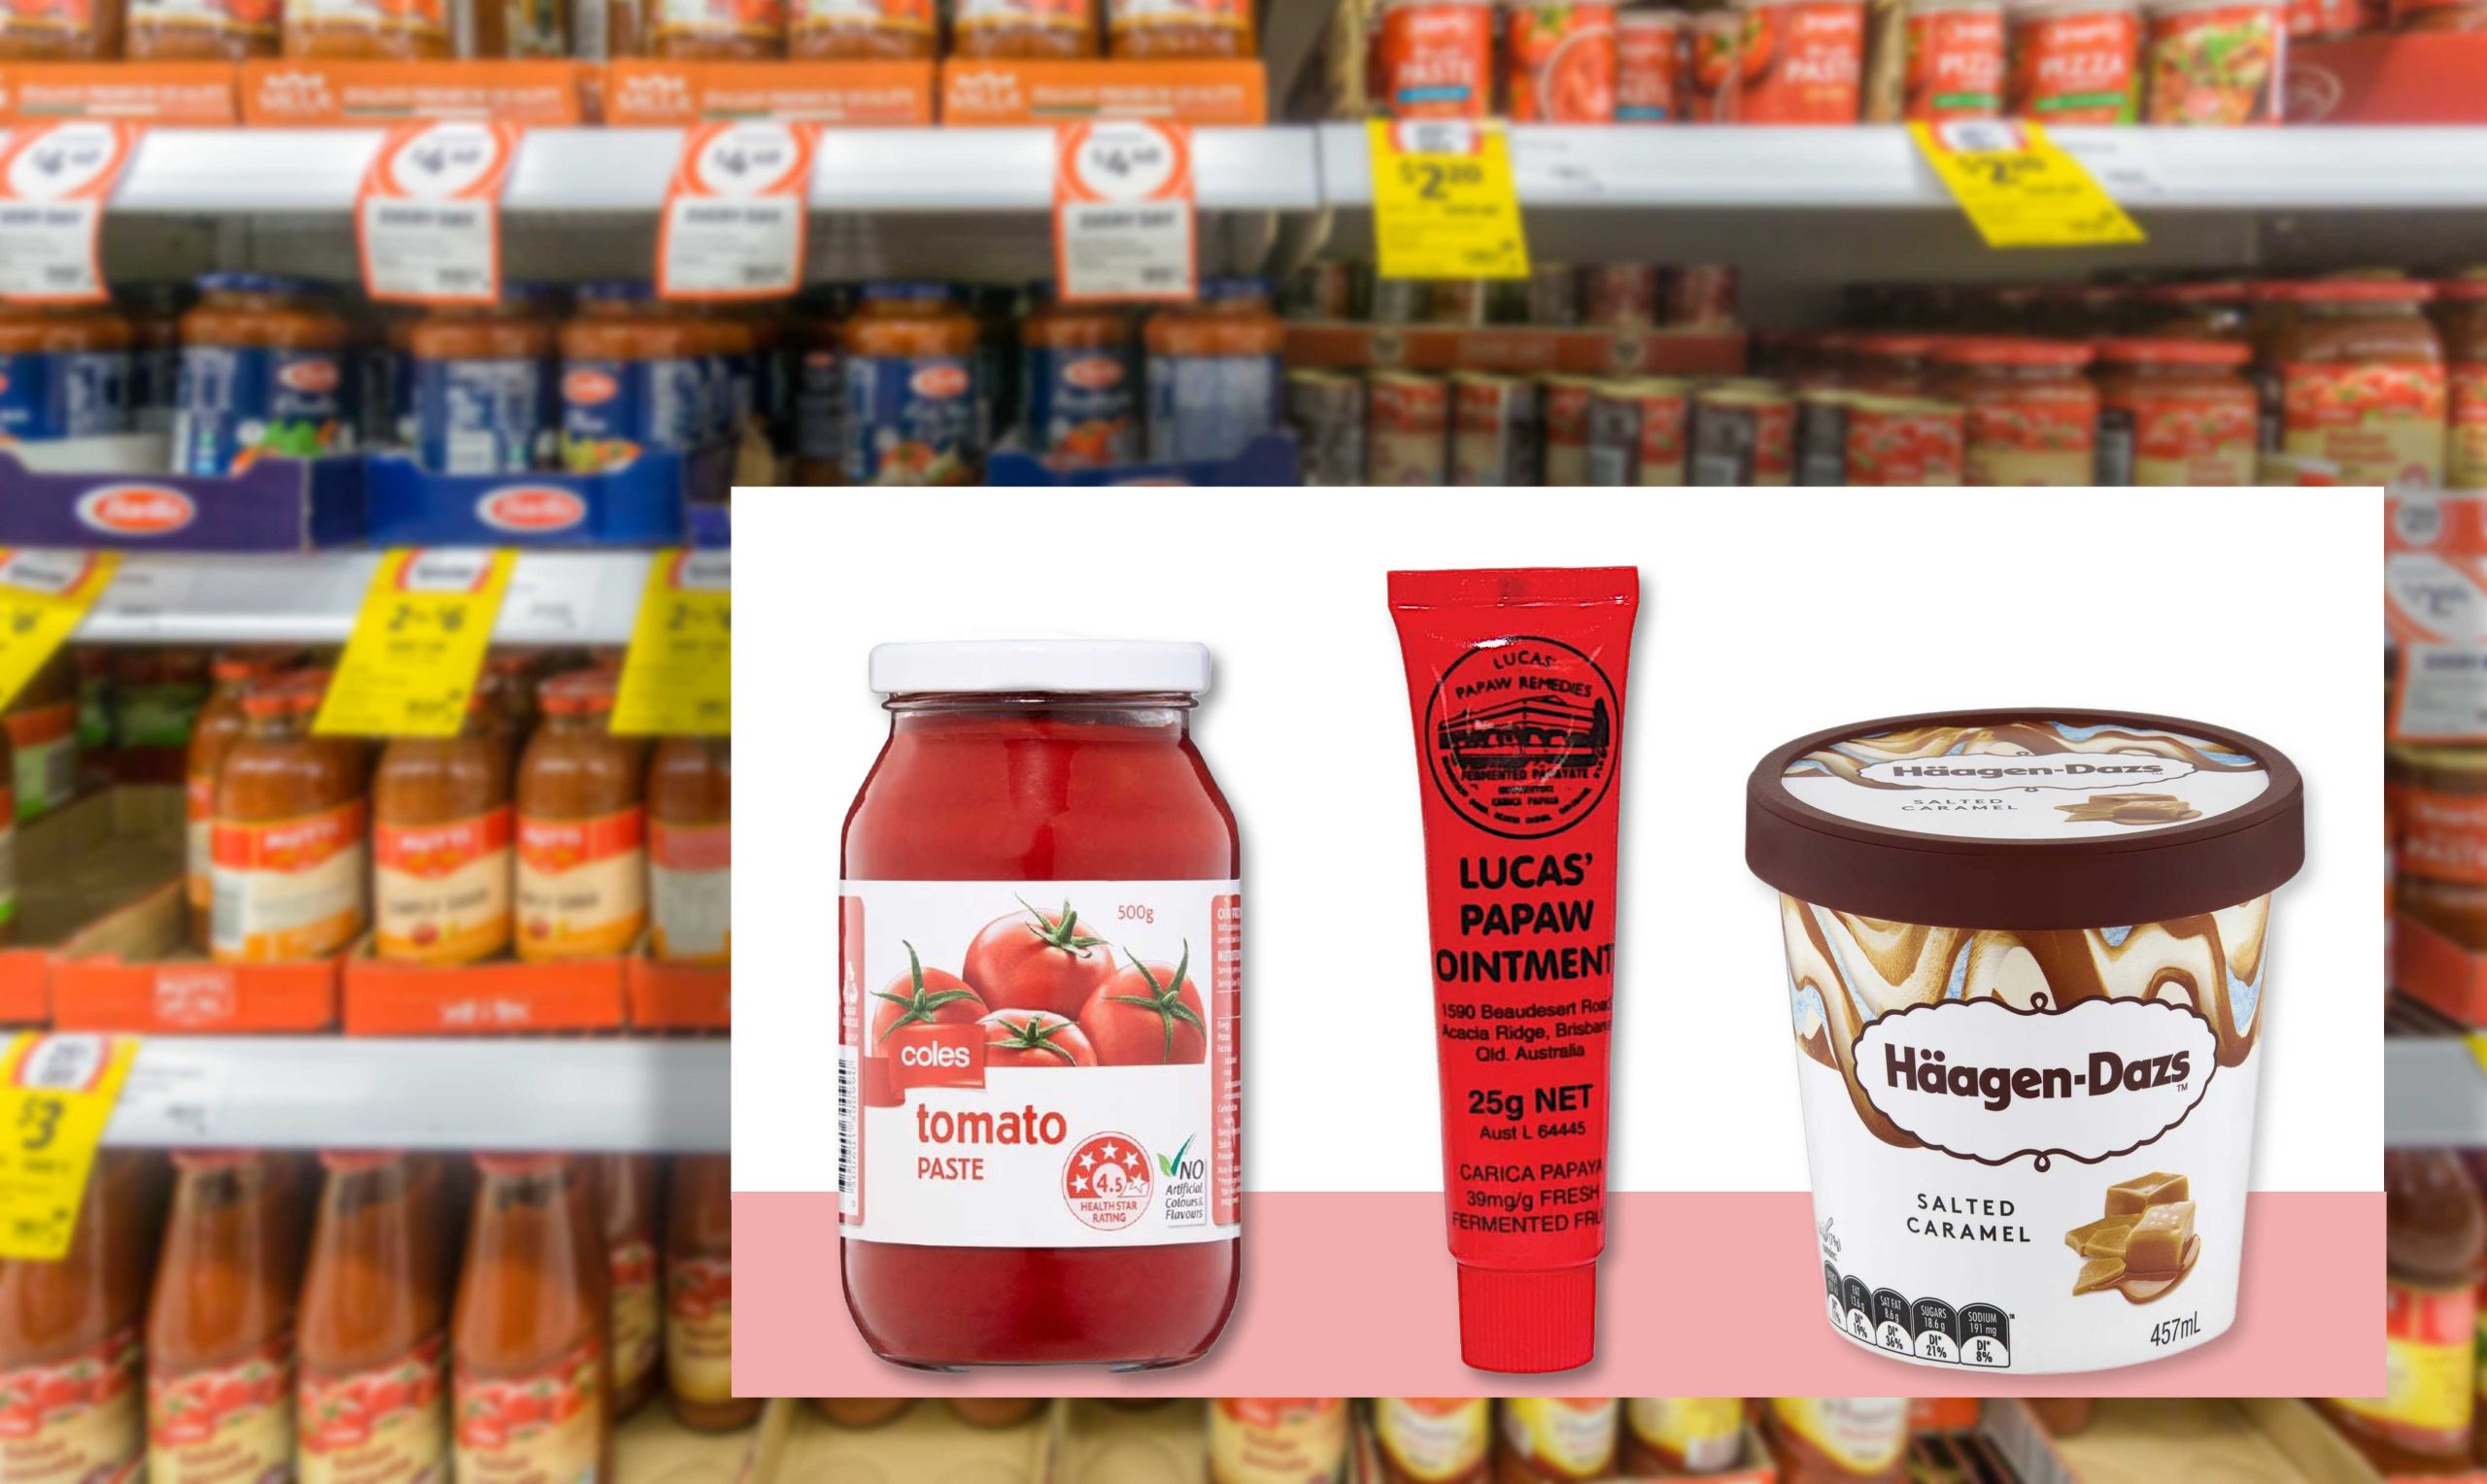 Häagen-Dazs ice cream, Lucas’ Paw Paw ointment and Coles tomato paste are all subject to an immediate recall. PICTURE: BARRIER TRUTH